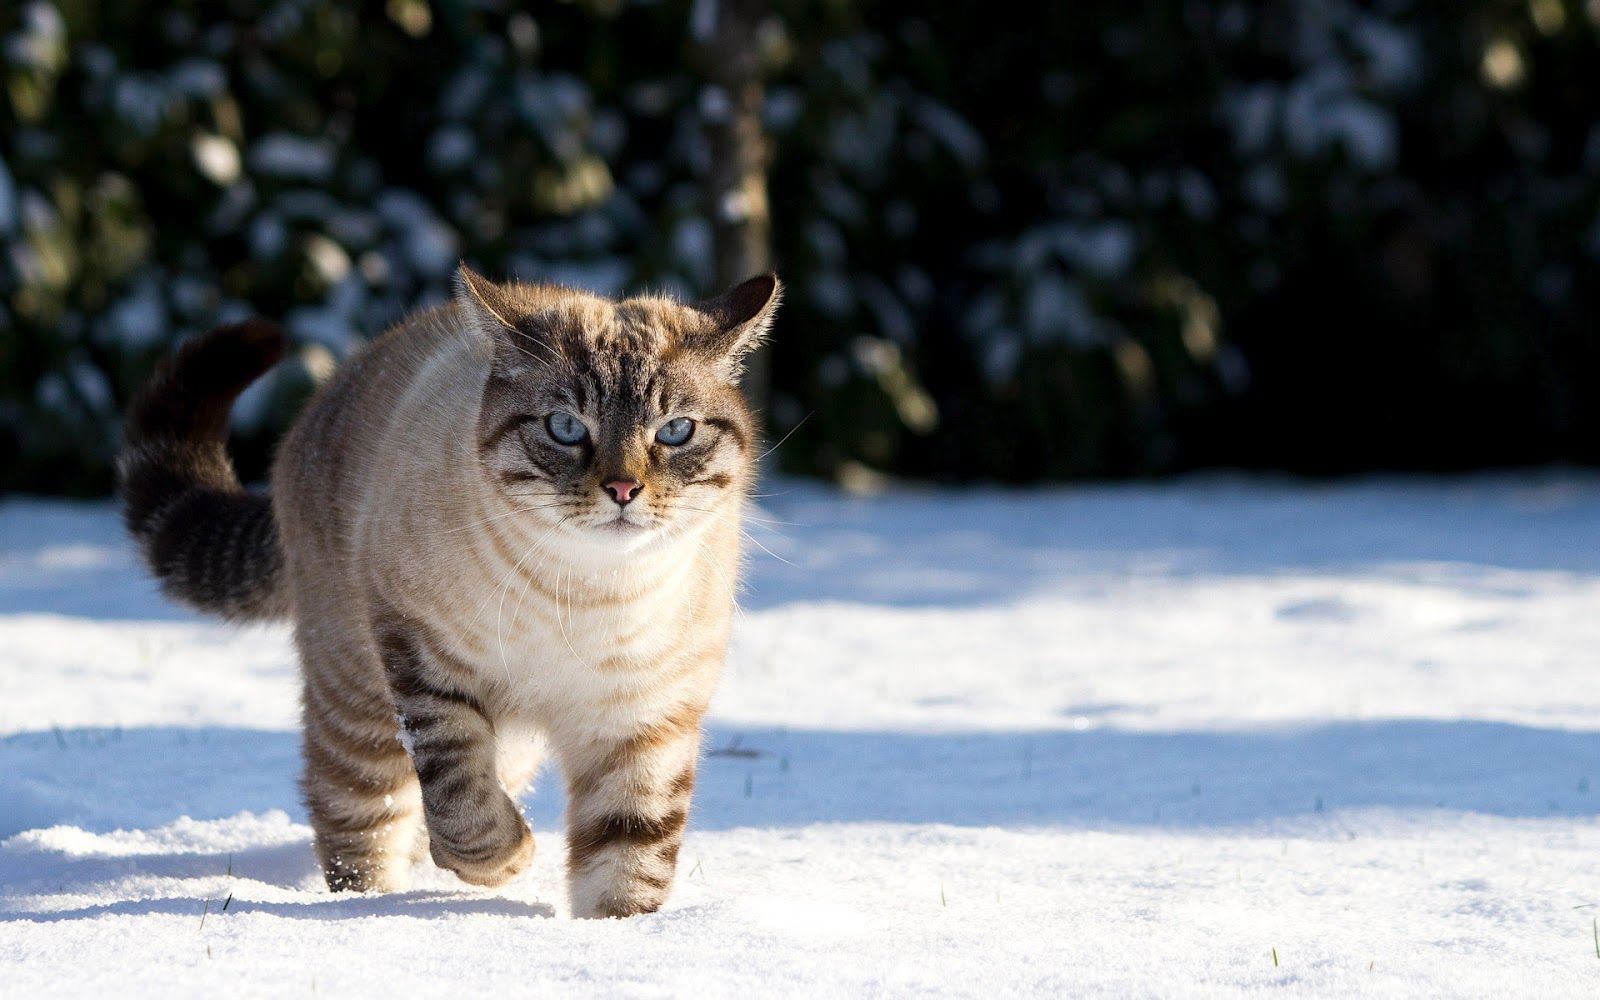 wallpaper with a cute cat walking in the snow HD cat wallpaper 1600x1000. Kitten wallpaper, Cute cats and kittens, Winter cat